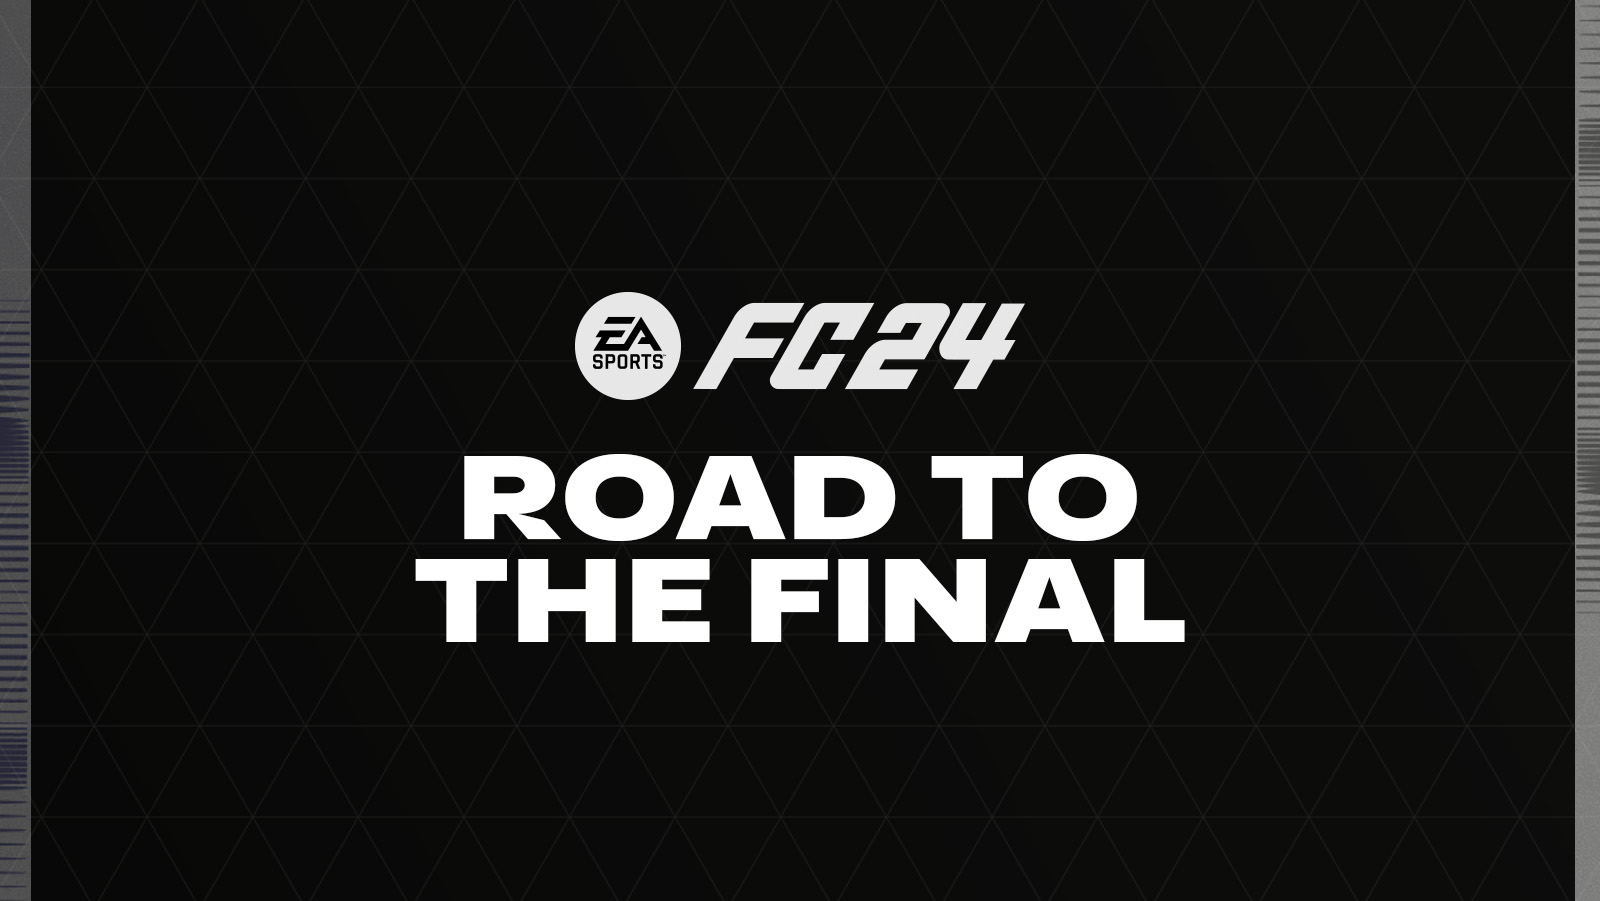 FC 24 Road to the Final (RTTF)